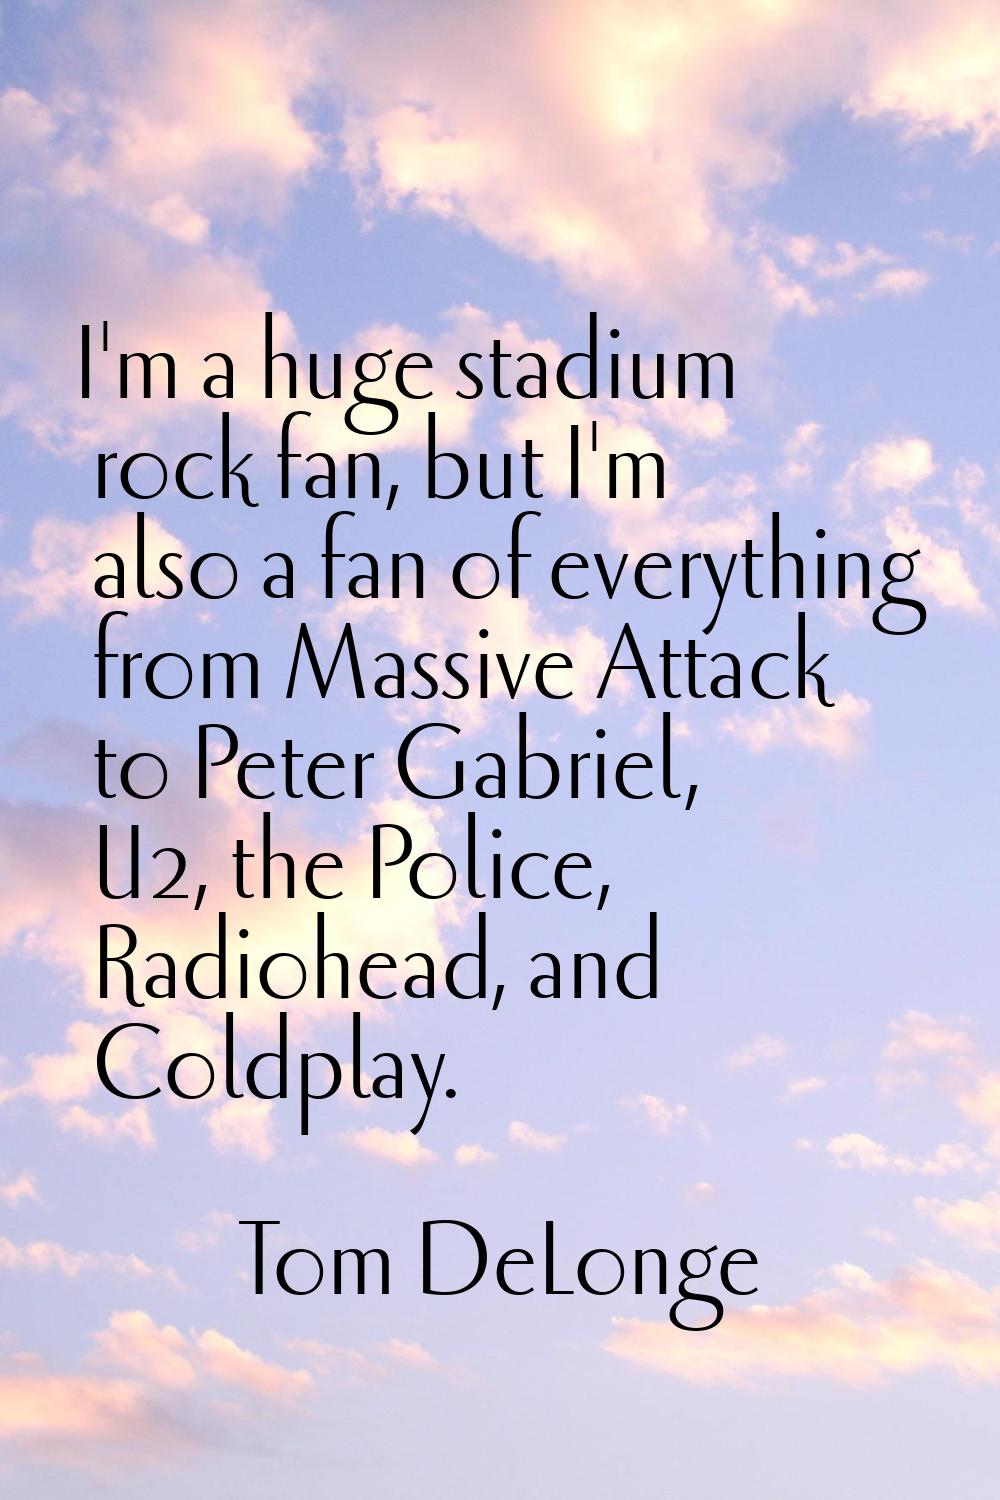 I'm a huge stadium rock fan, but I'm also a fan of everything from Massive Attack to Peter Gabriel,